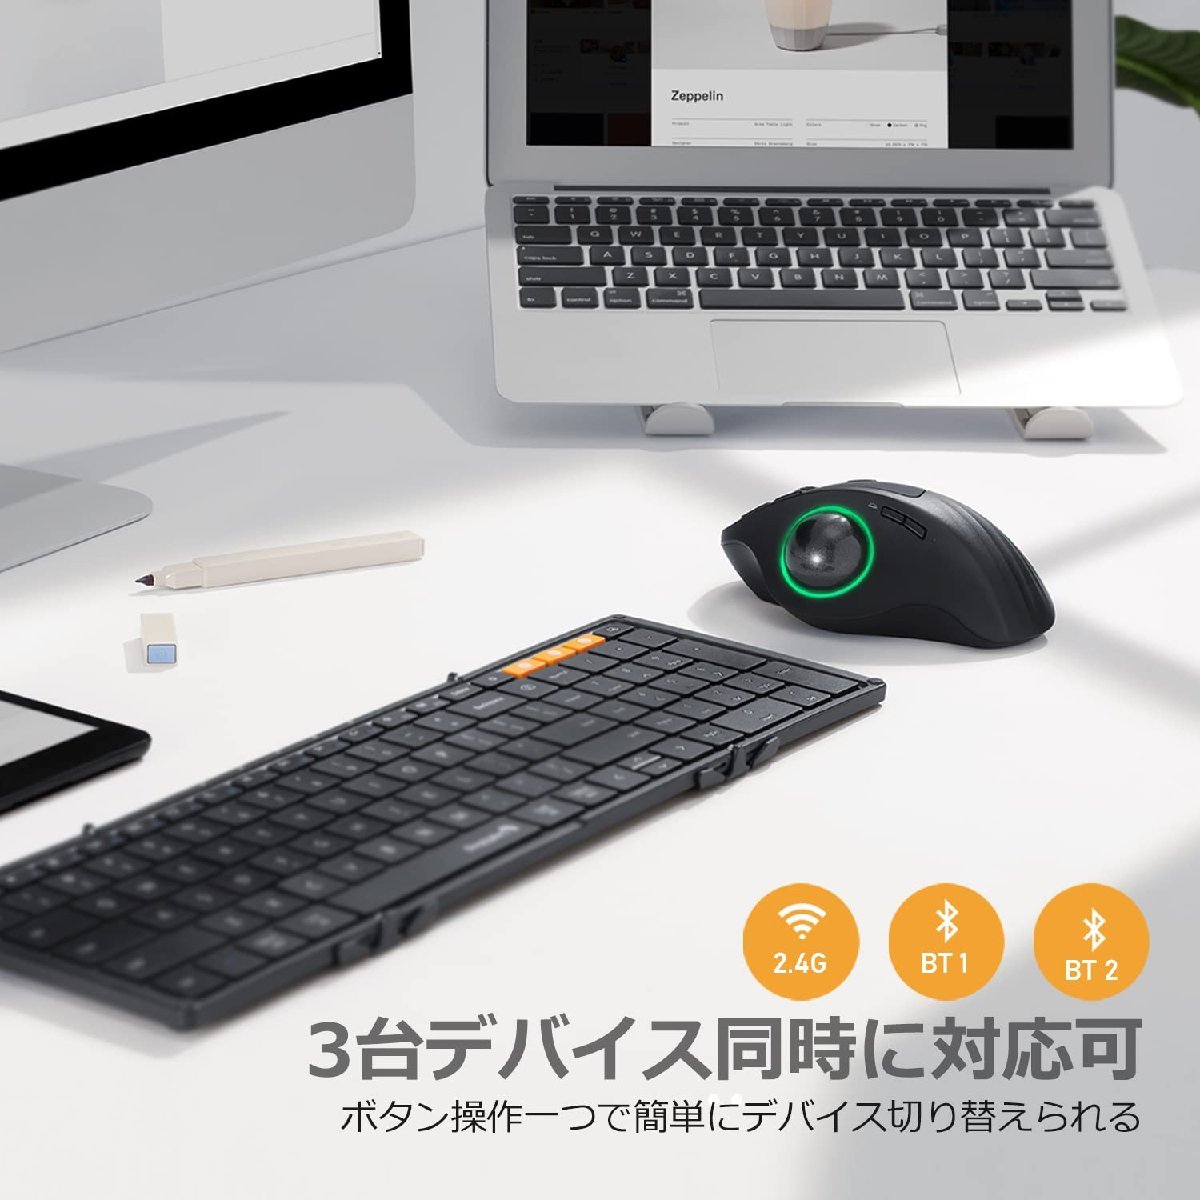  free shipping * trackball mouse RGB light attaching 2.4G.Bluetooth both correspondence wireless mouse 7 button ( black )